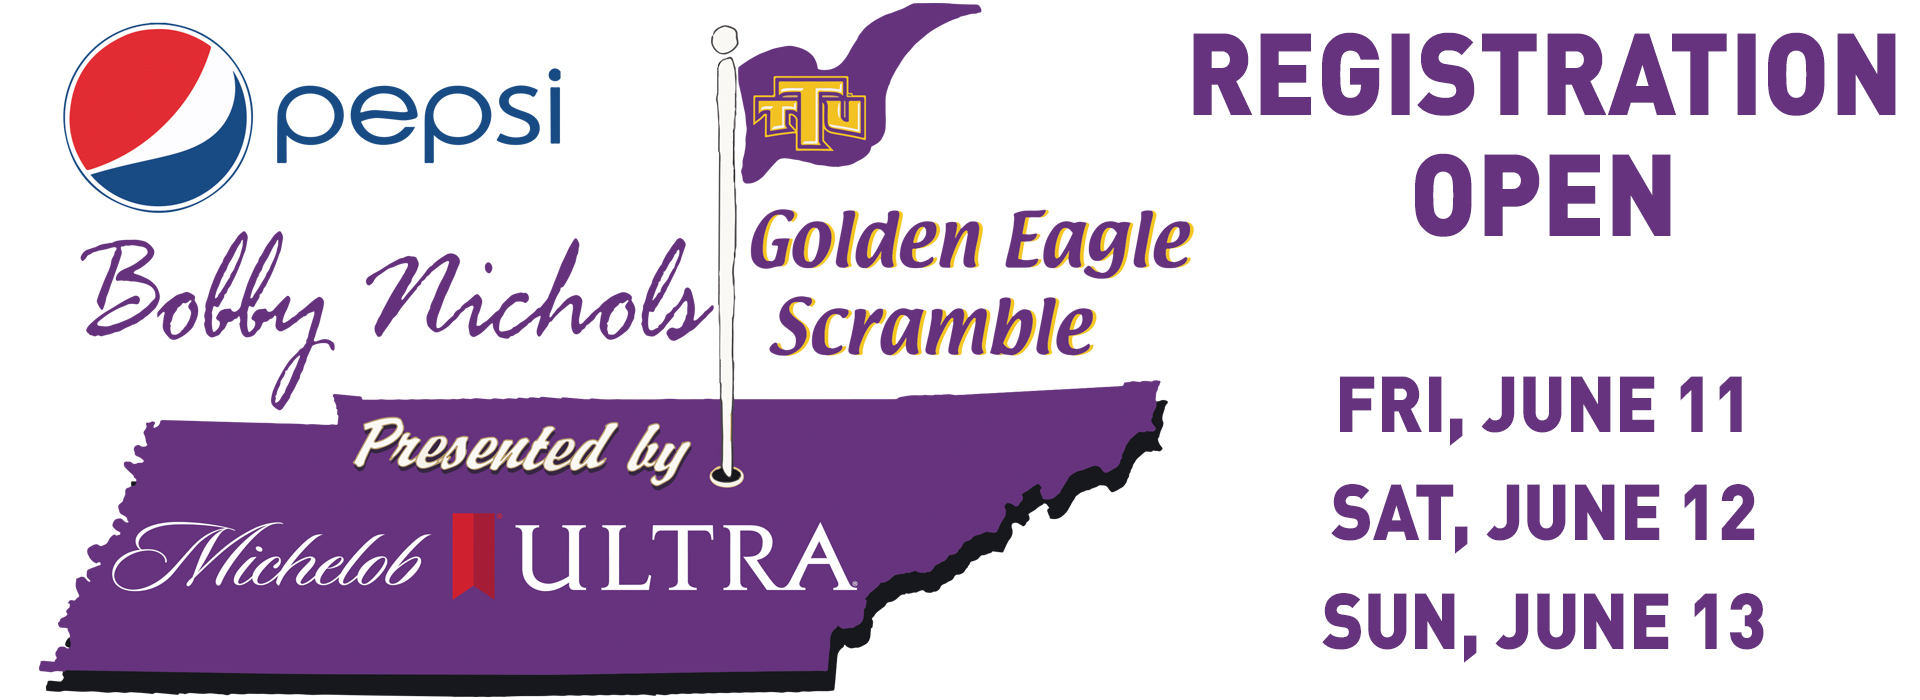 2021 Pepsi Bobby Nichols Golden Eagle Scramble presented by Michelob Ultra field filling up